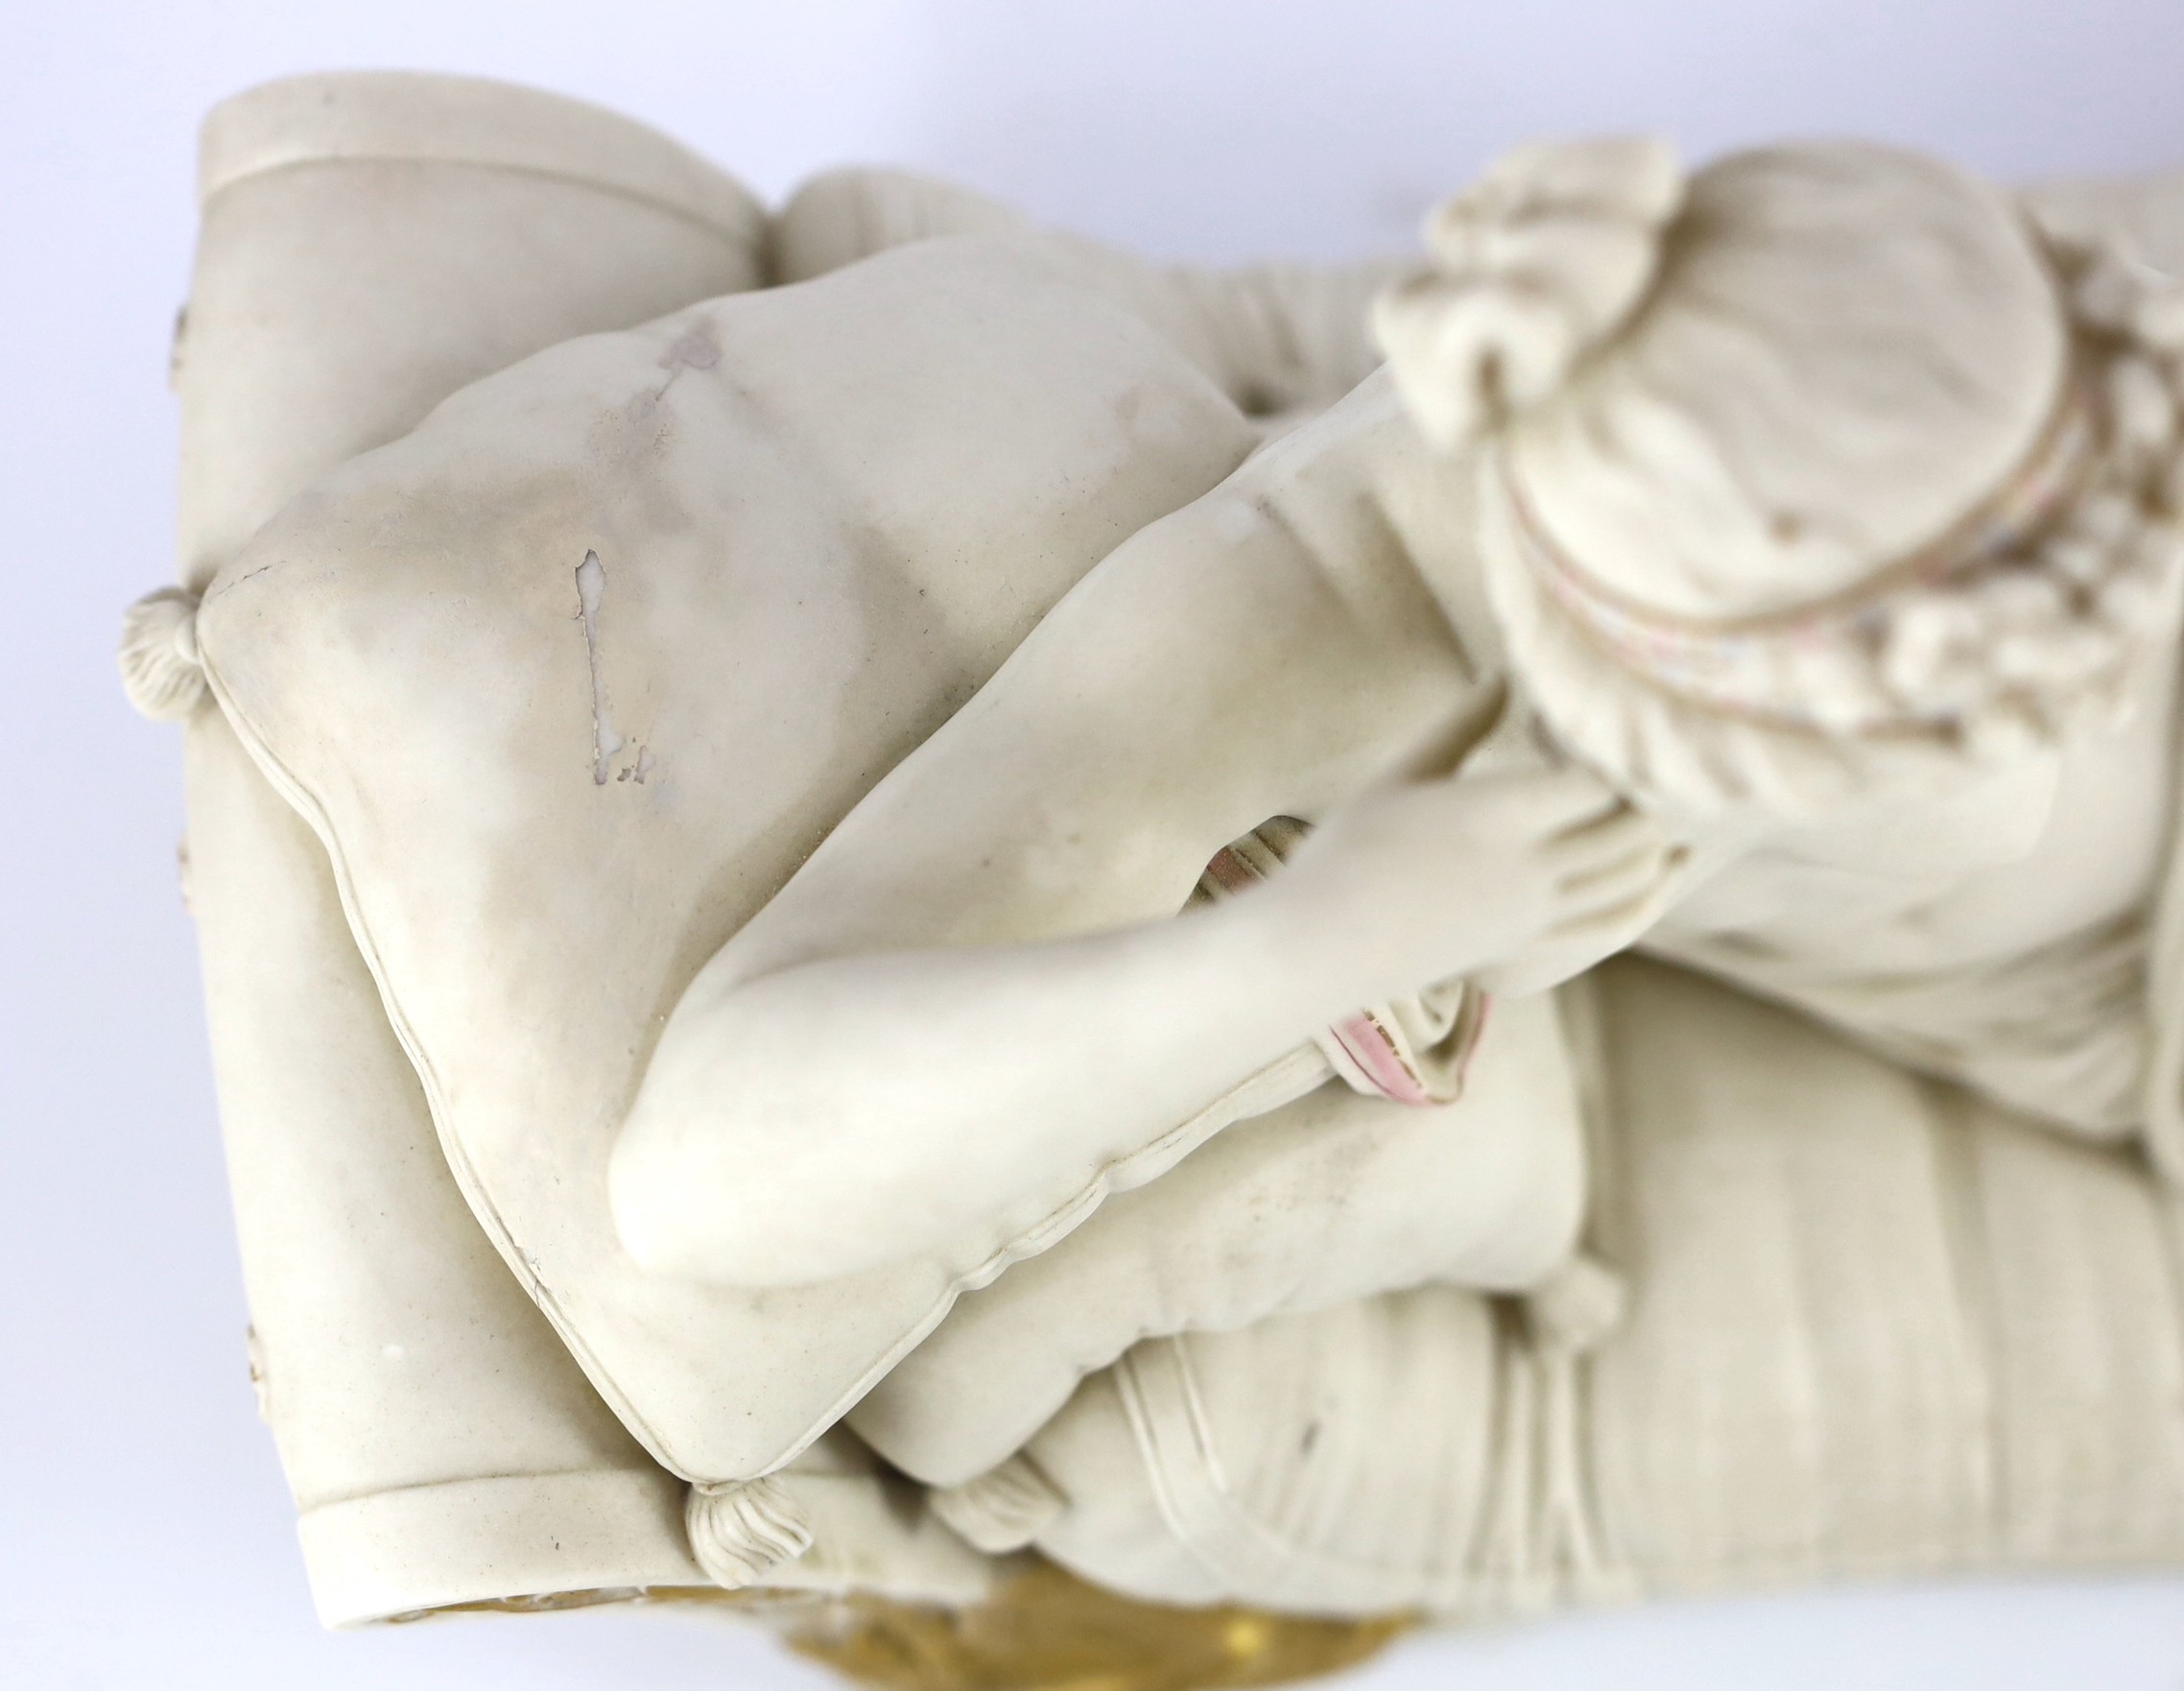 A Royal Worcester parian figure, after Antonio Canova, of Pauline Borghese as Venus Victorious, modelled by James Hadley, c.1866, 59.5cm long, some restoration to edge of base